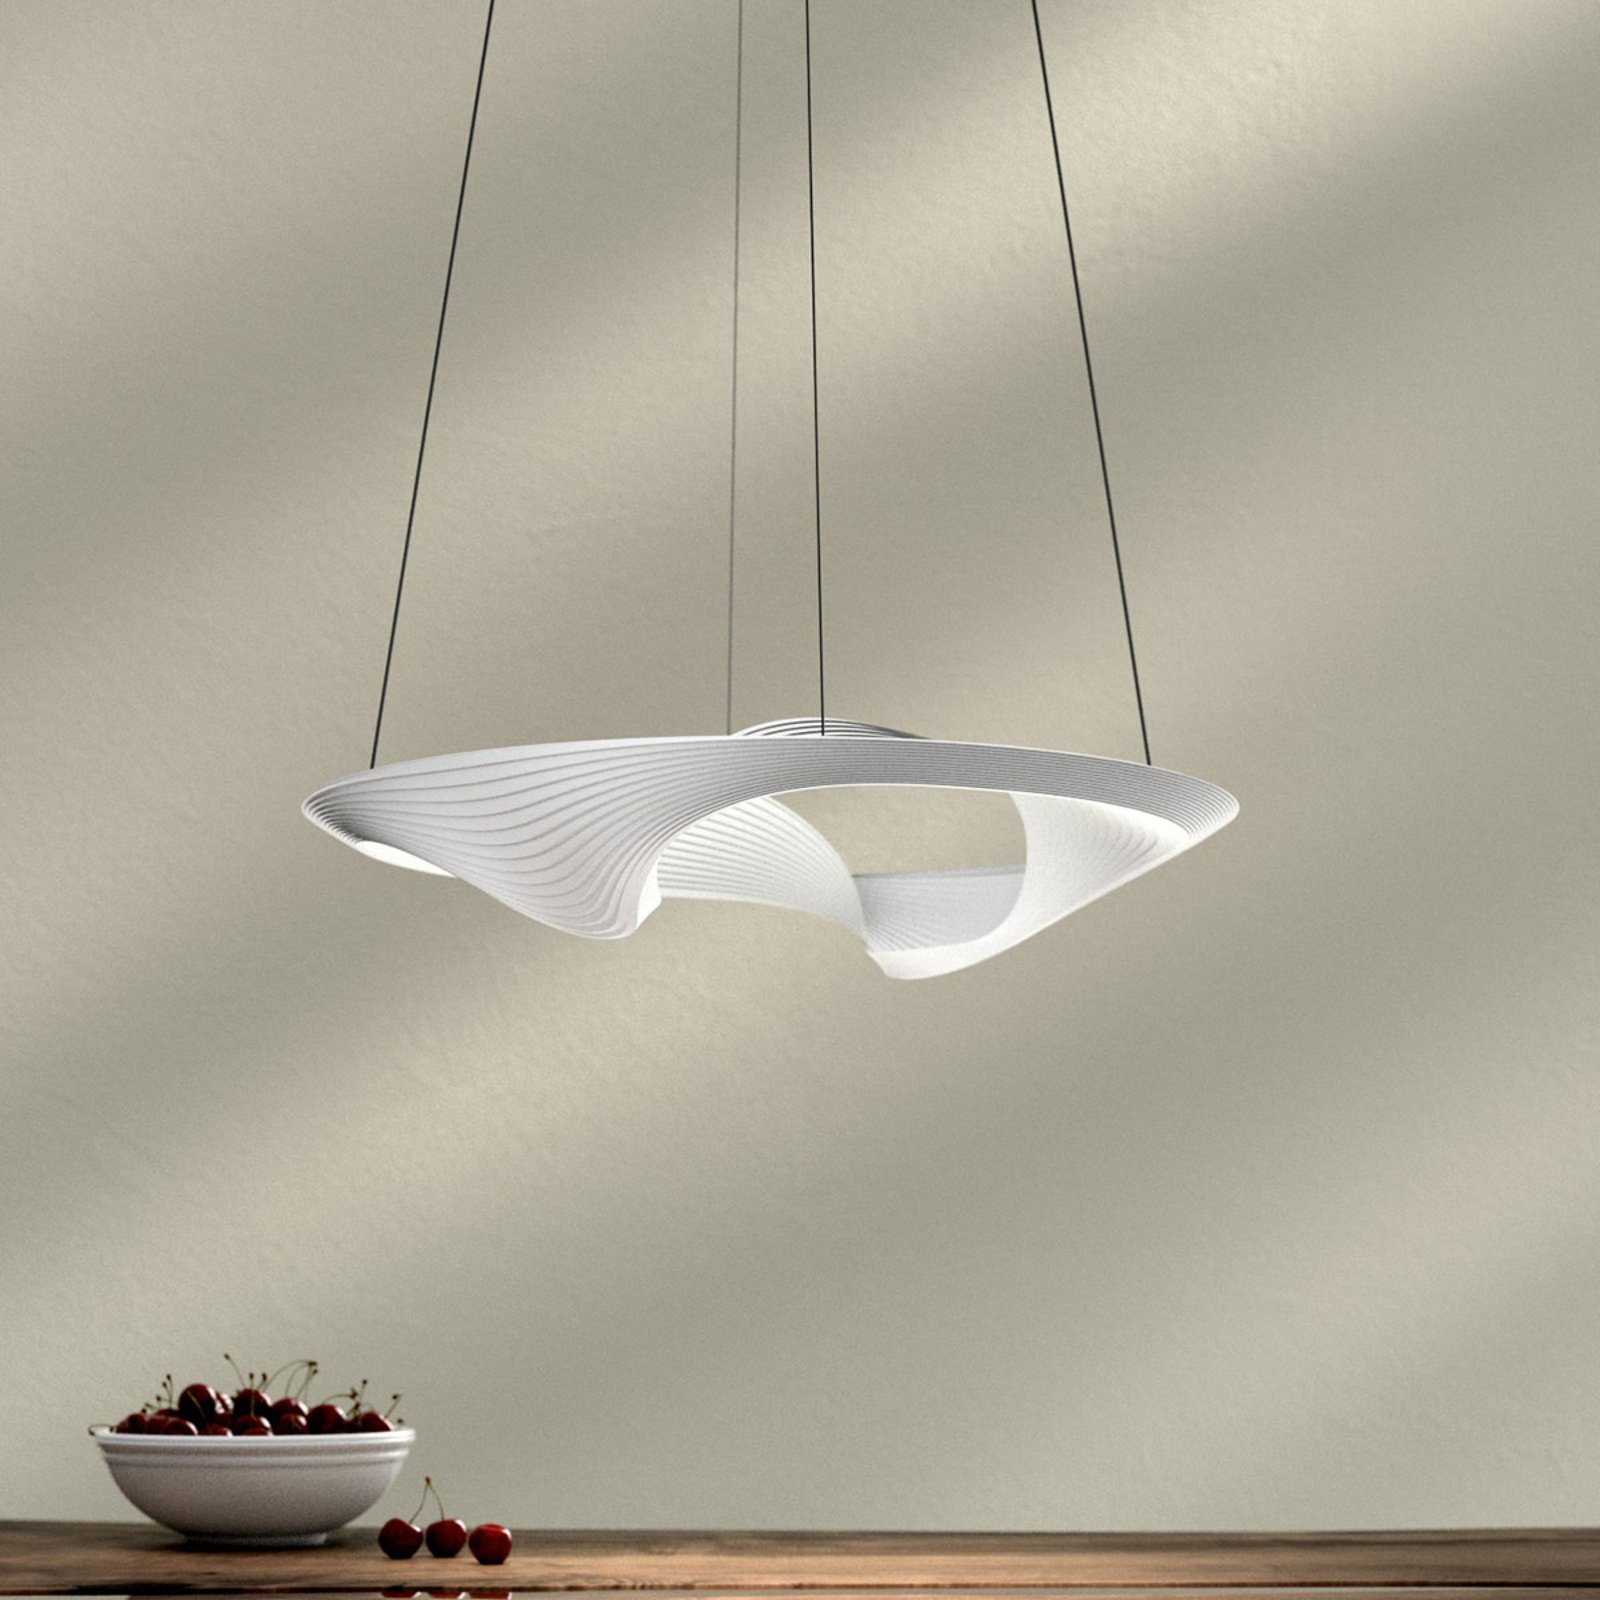 Dimmable LED hanging light Sestessa Cabrio